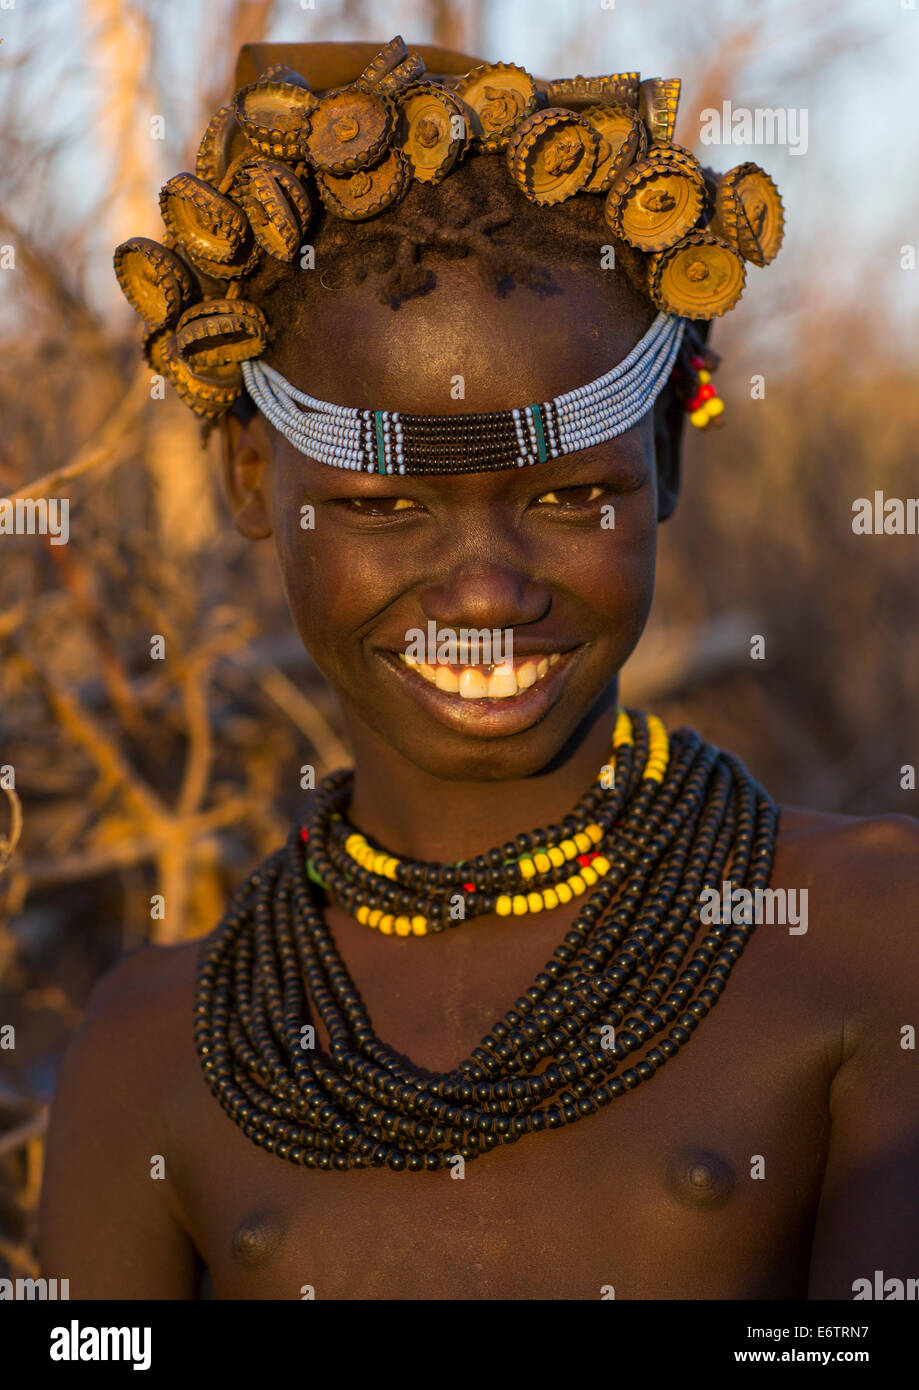 Portrait Of A Young Dassanech Girl Wearing Bottle Caps Headgear And Beaded Necklaces, Omorate, Omo Valley, Ethiopia Stock Photo